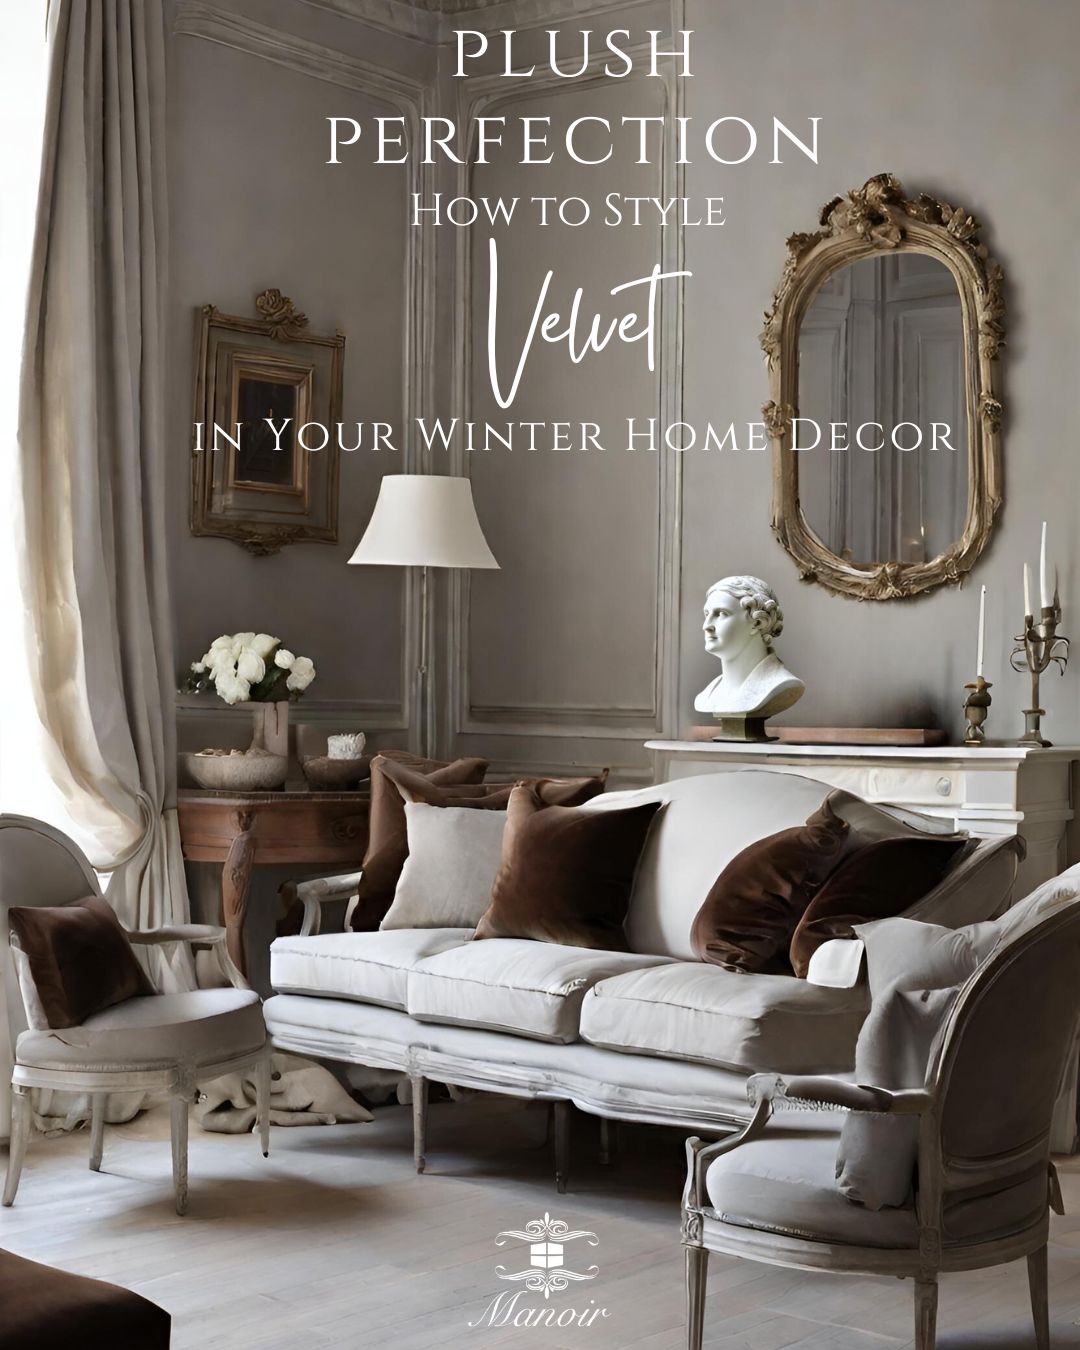 Plush Perfection: How to Style Velvet in Your Winter Home Decor